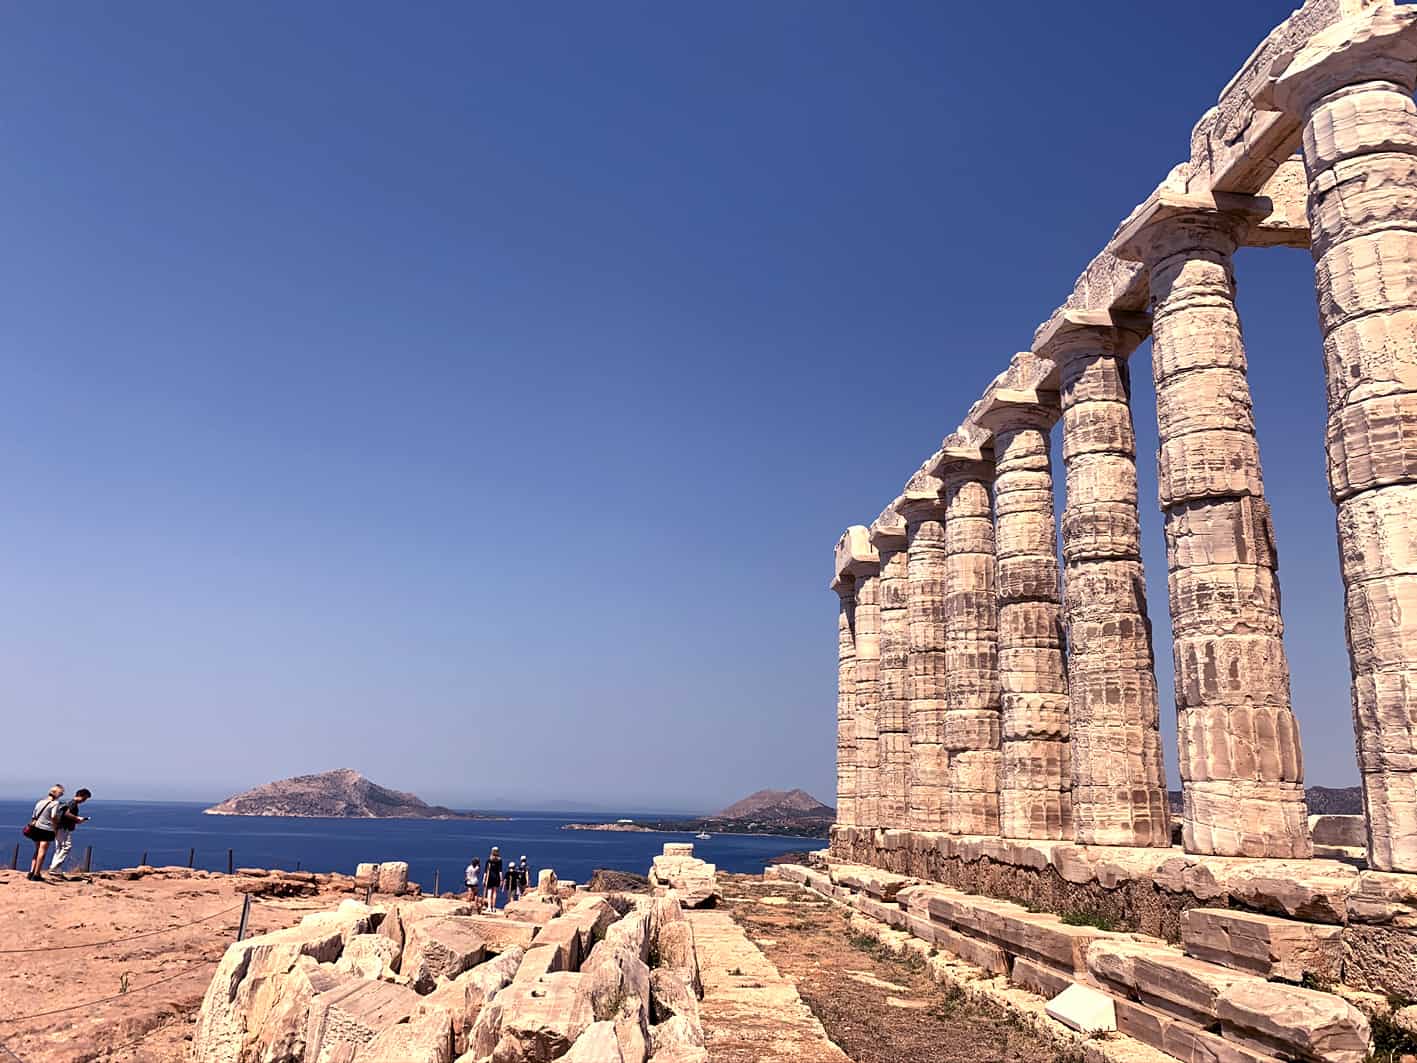 trip to cape sounion sightseeing at the temple with a sea view during our Private Tours Vacation Packages trip